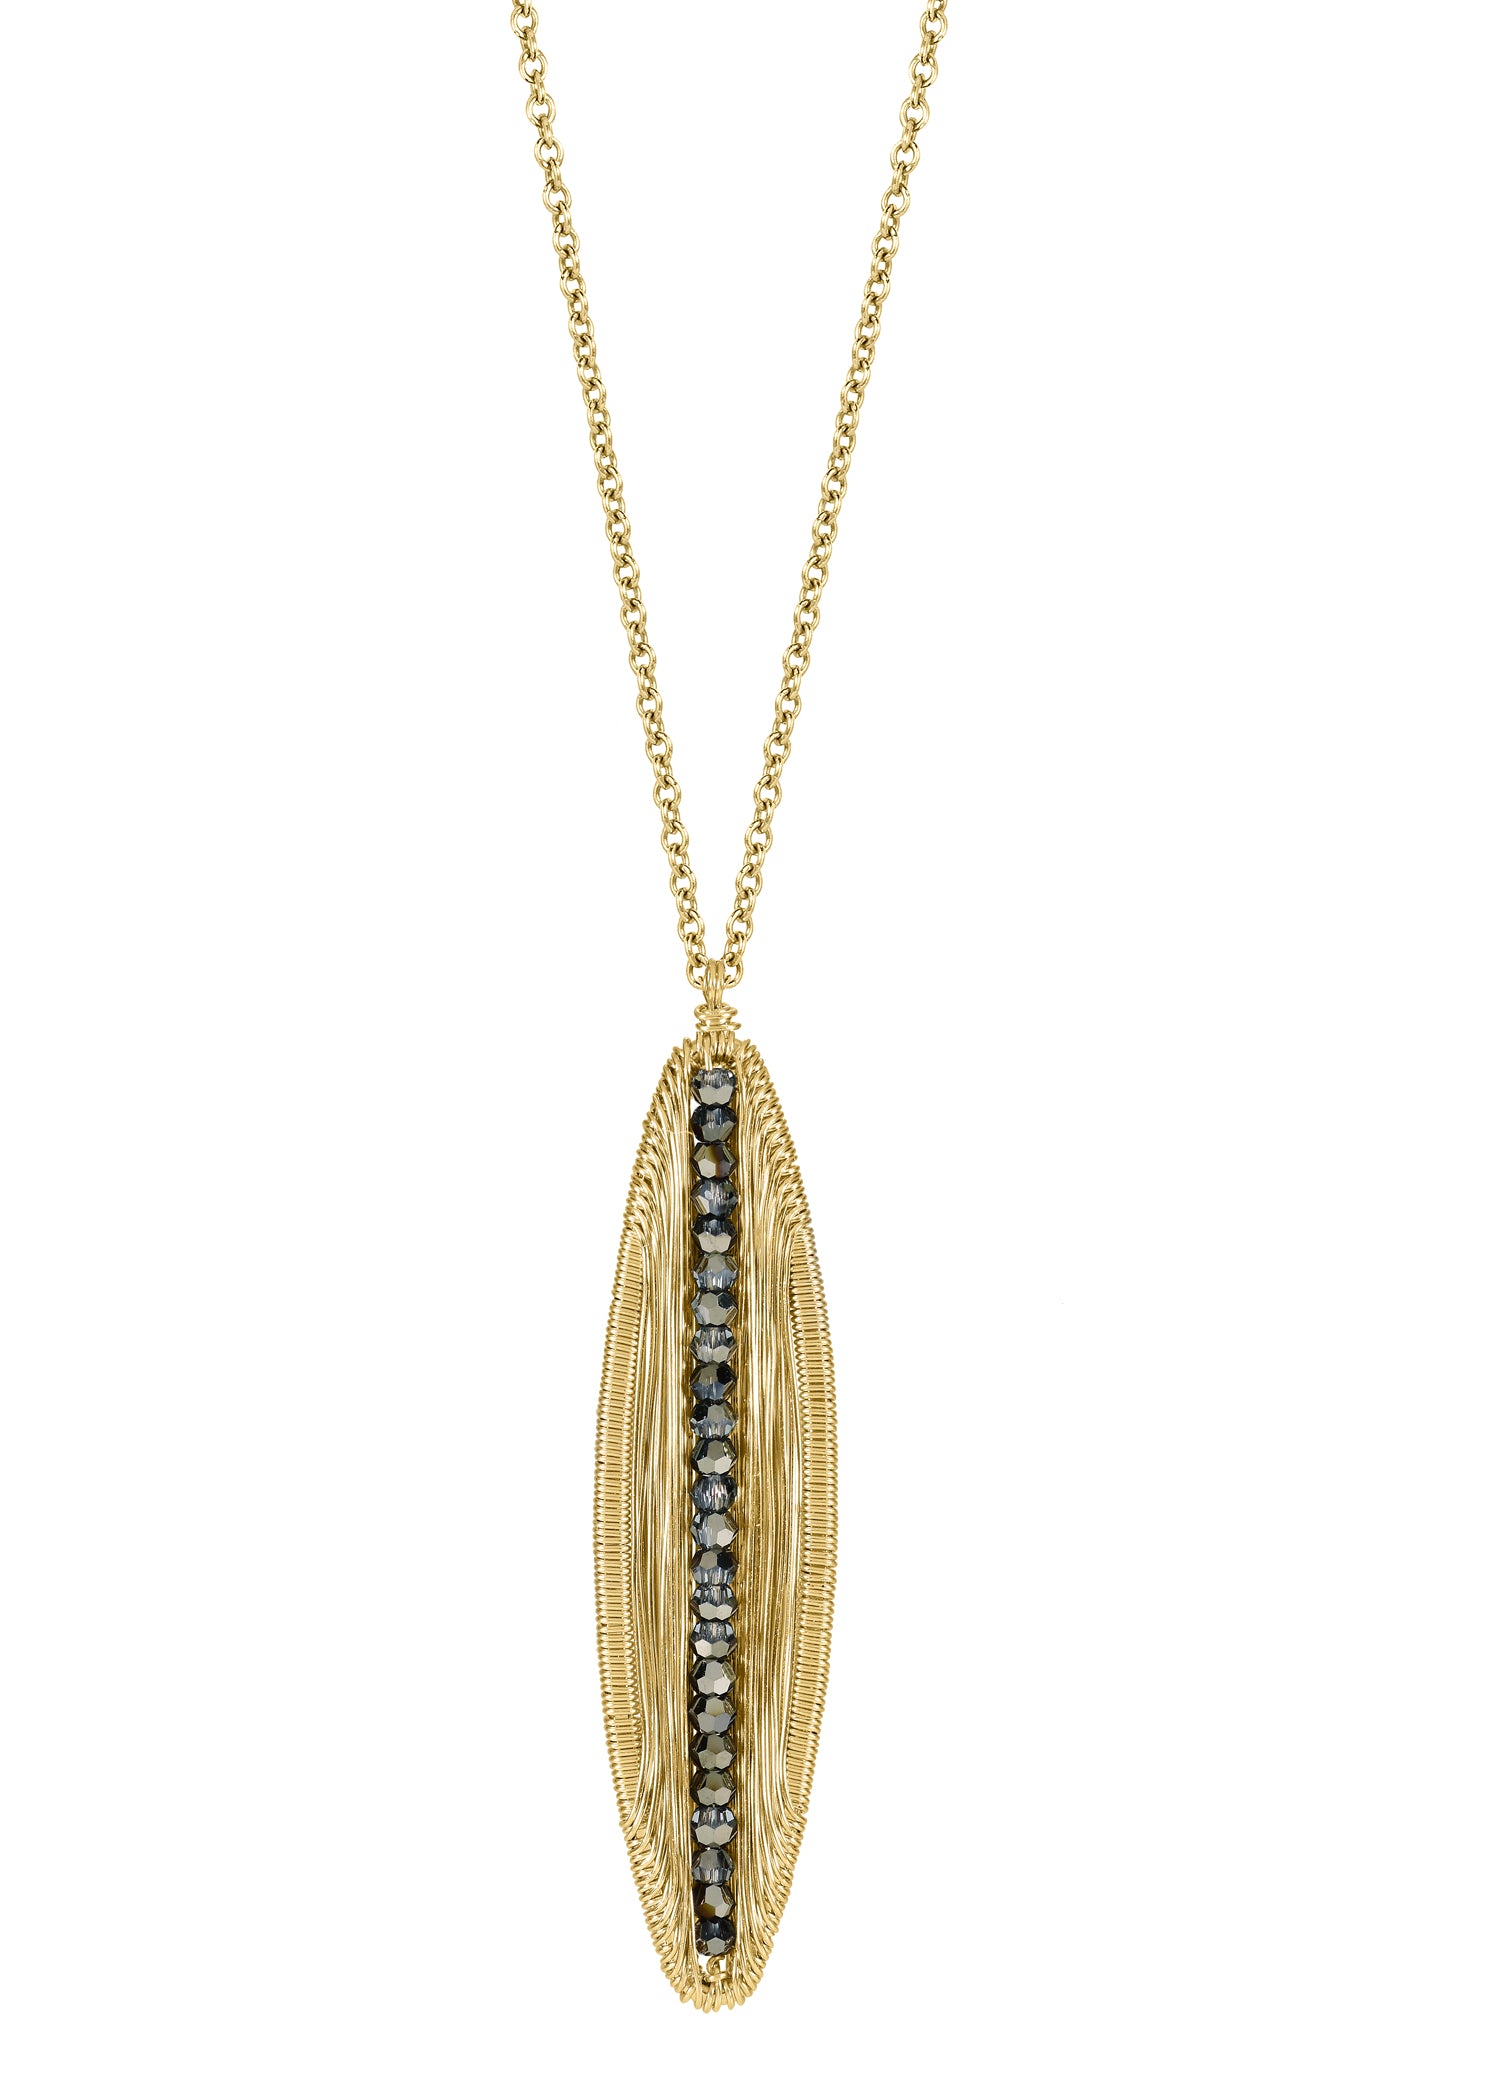 Crystal 14k gold fill Necklace measures 18" in length Pendant measures 1-11/16" in length and 3/8" in width at the widest point Handmade in our Los Angeles studio